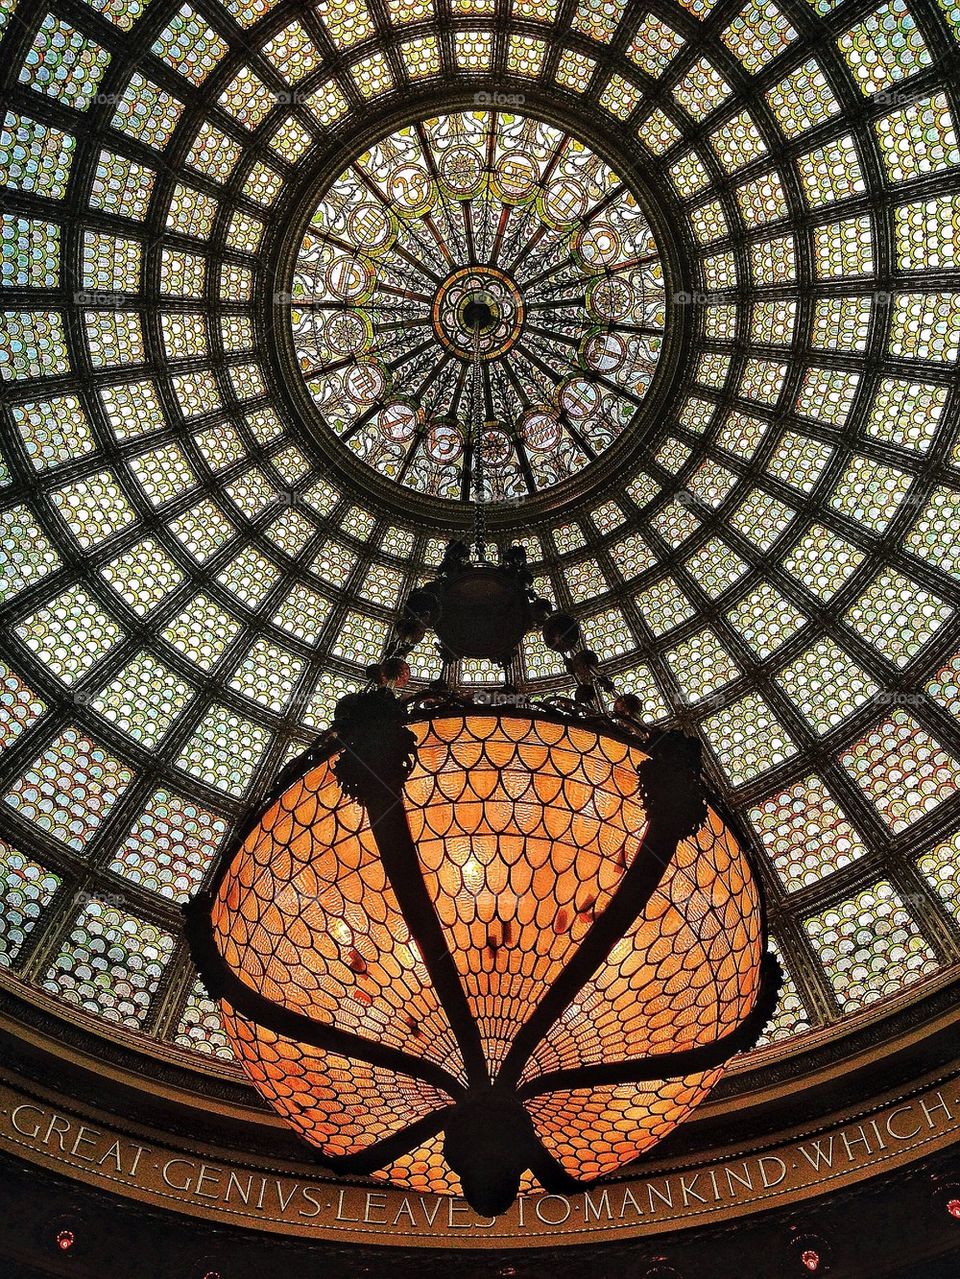 chicago cultural center united states chicago museum by LordHouse